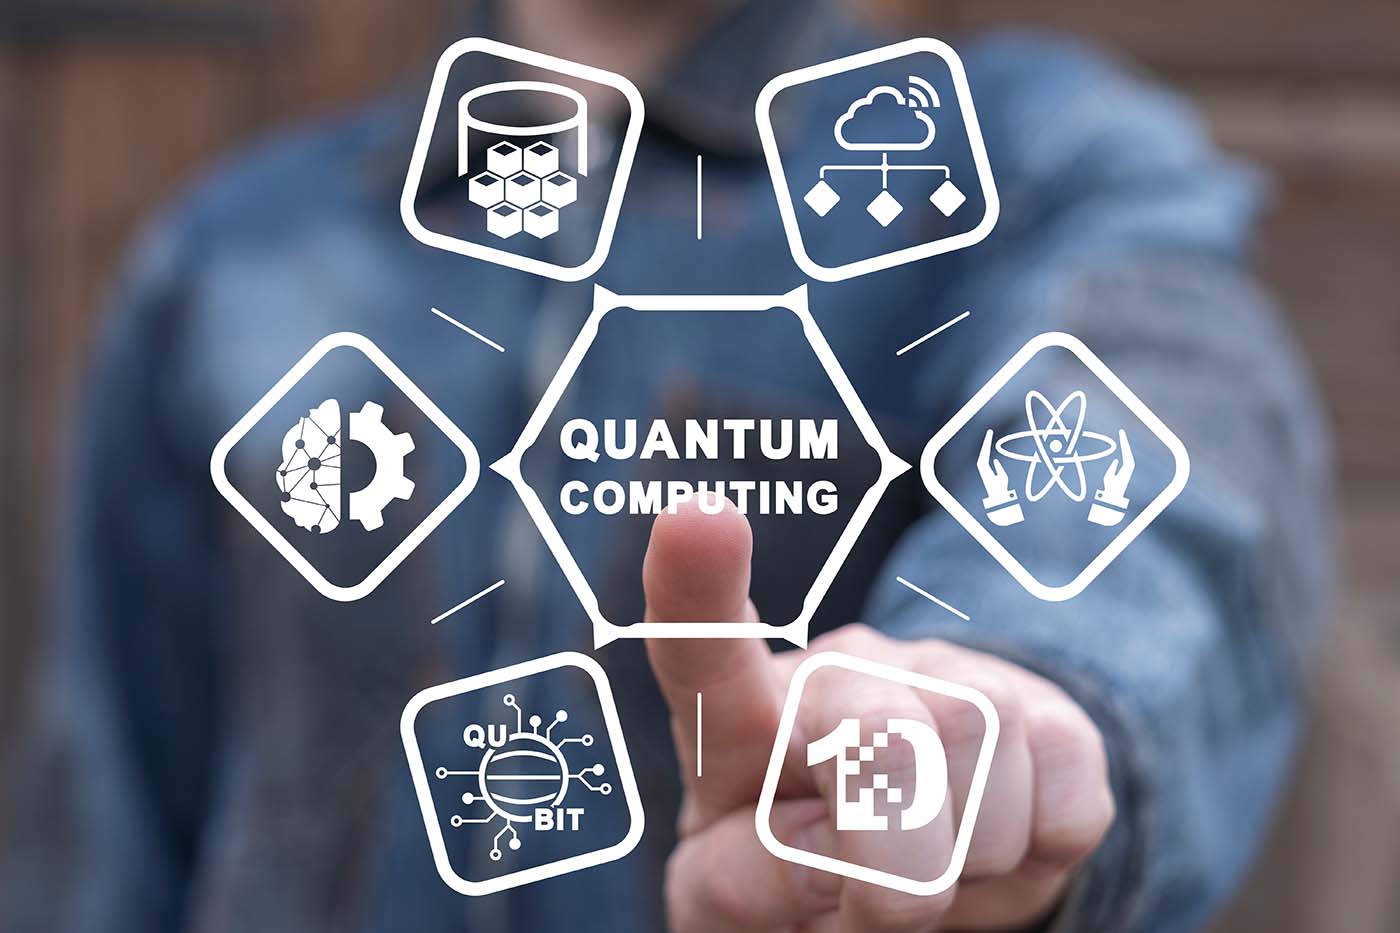 Is Quantum Computing Right for Your Business? – Source: www.techrepublic.com